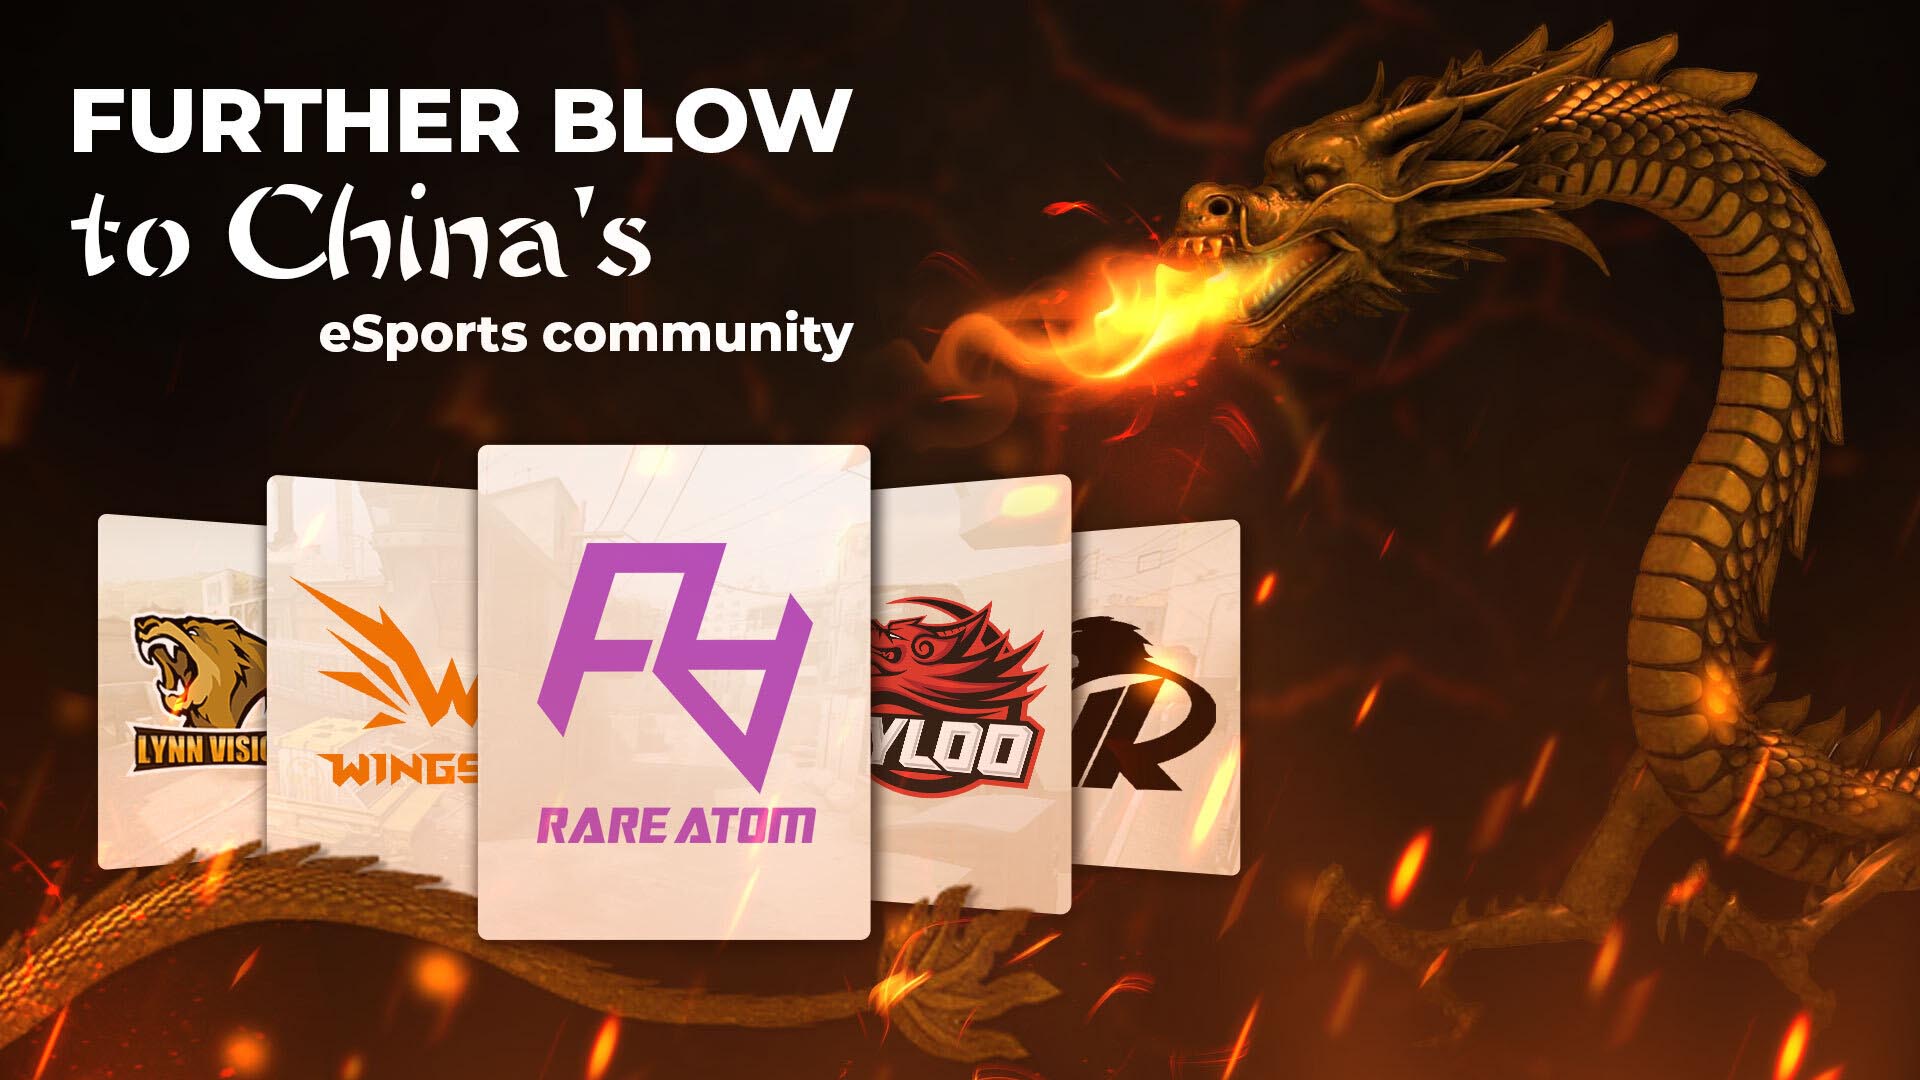 Further blow to China’s eSports community